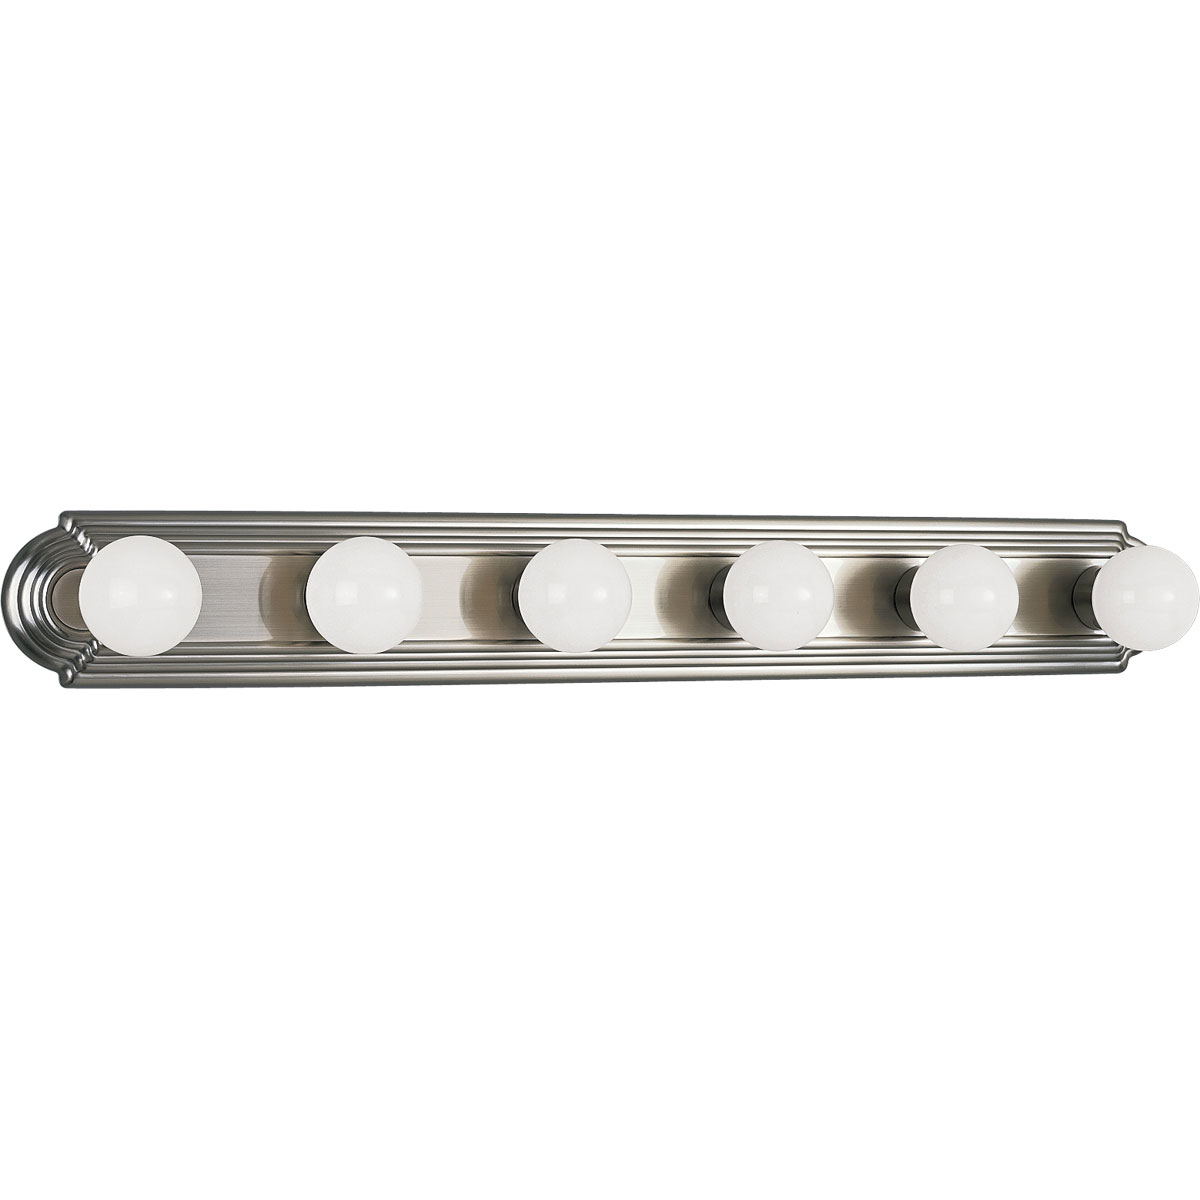 Six-light embossed, wall mount bracket. Sockets are on 6 inch centers enclosed with matching cups. Broadway style lighting strip gives the room a Hollywood feel. Be flirtatious and glamorous with this inviting Brushed Nickel wall light decoration.